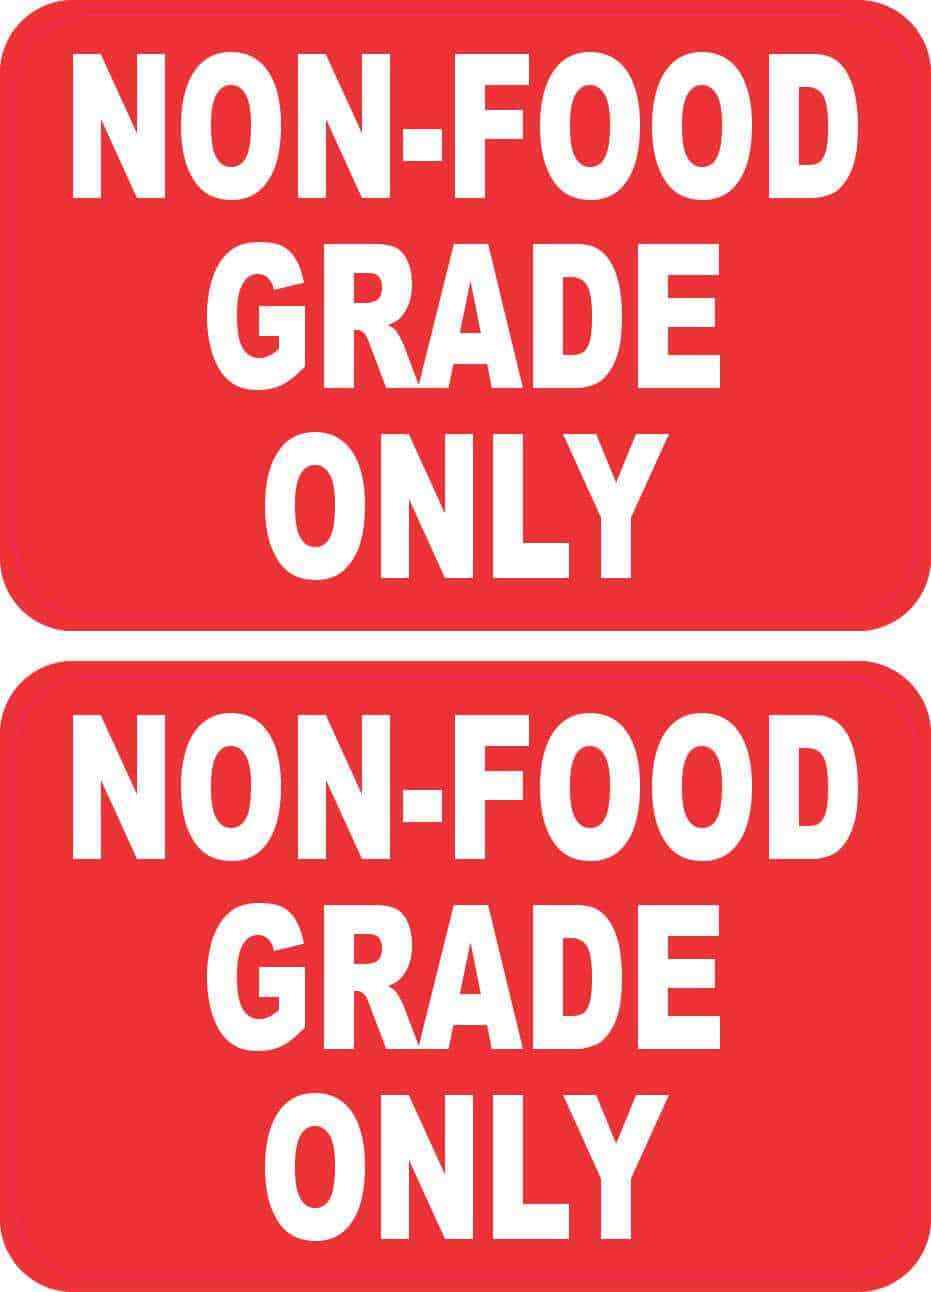 Red Non Food Grade Only Vinyl Stickers 1 sheet of 2, 3 inches x 2 inches each